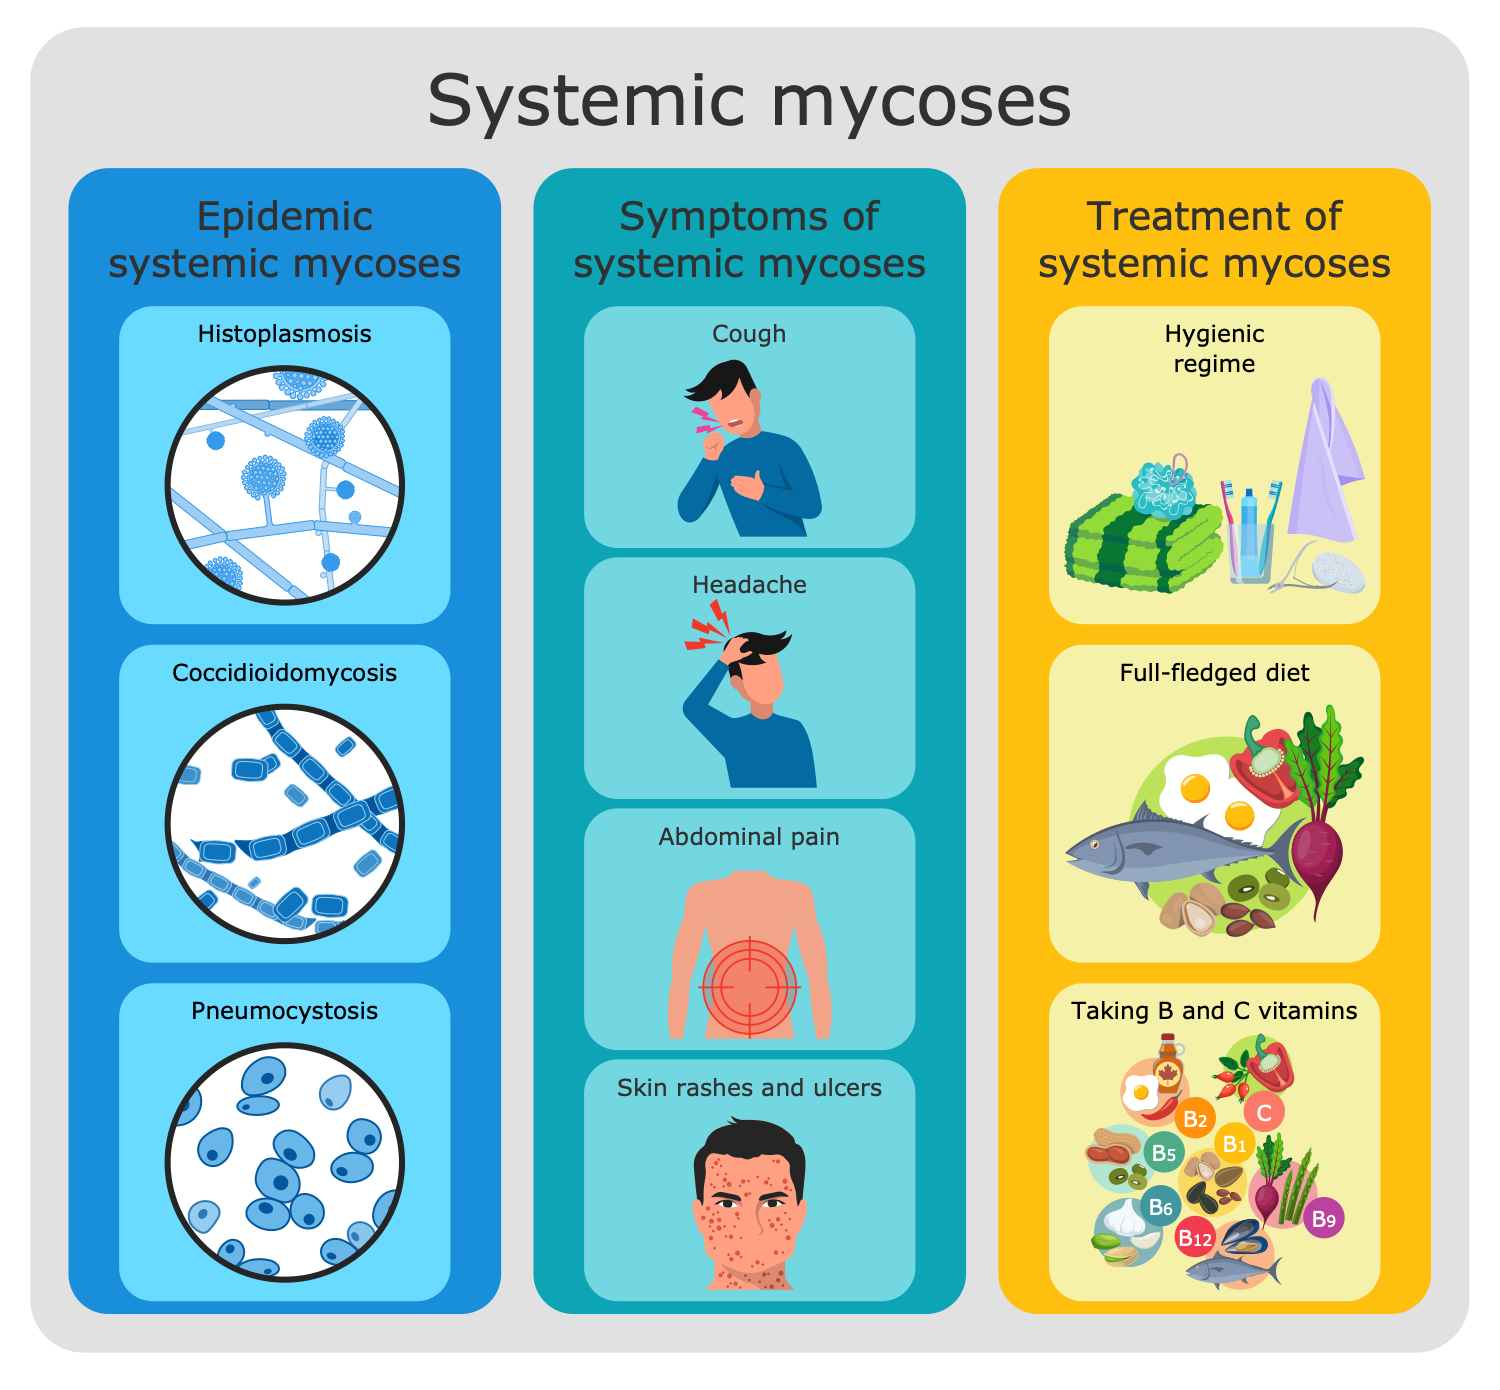 Systemic Mycoses